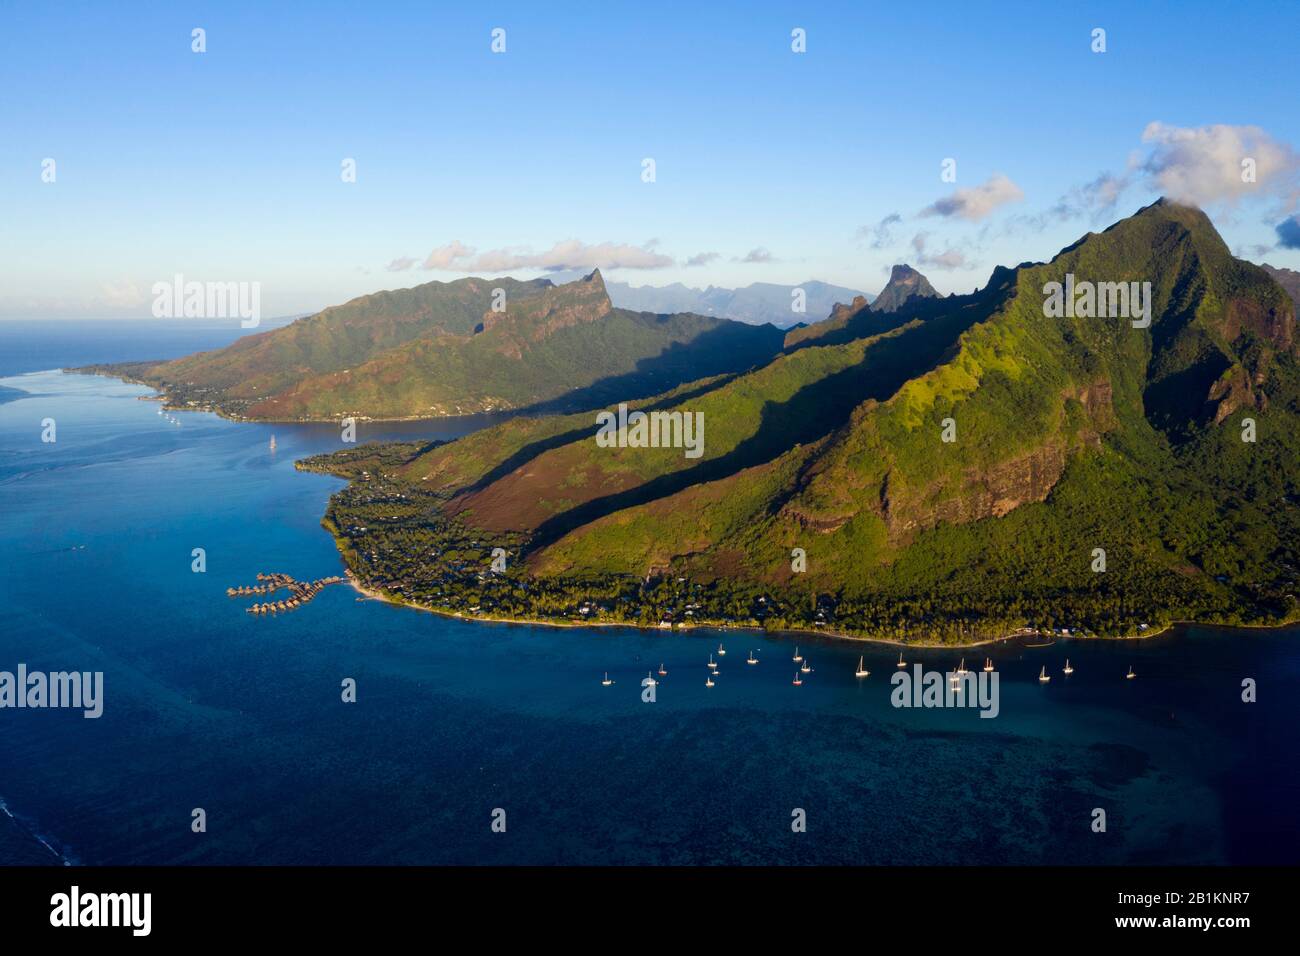 Aerial View of Cook's Bay and Opunohu Bay, Moorea, French Polynesia Stock Photo